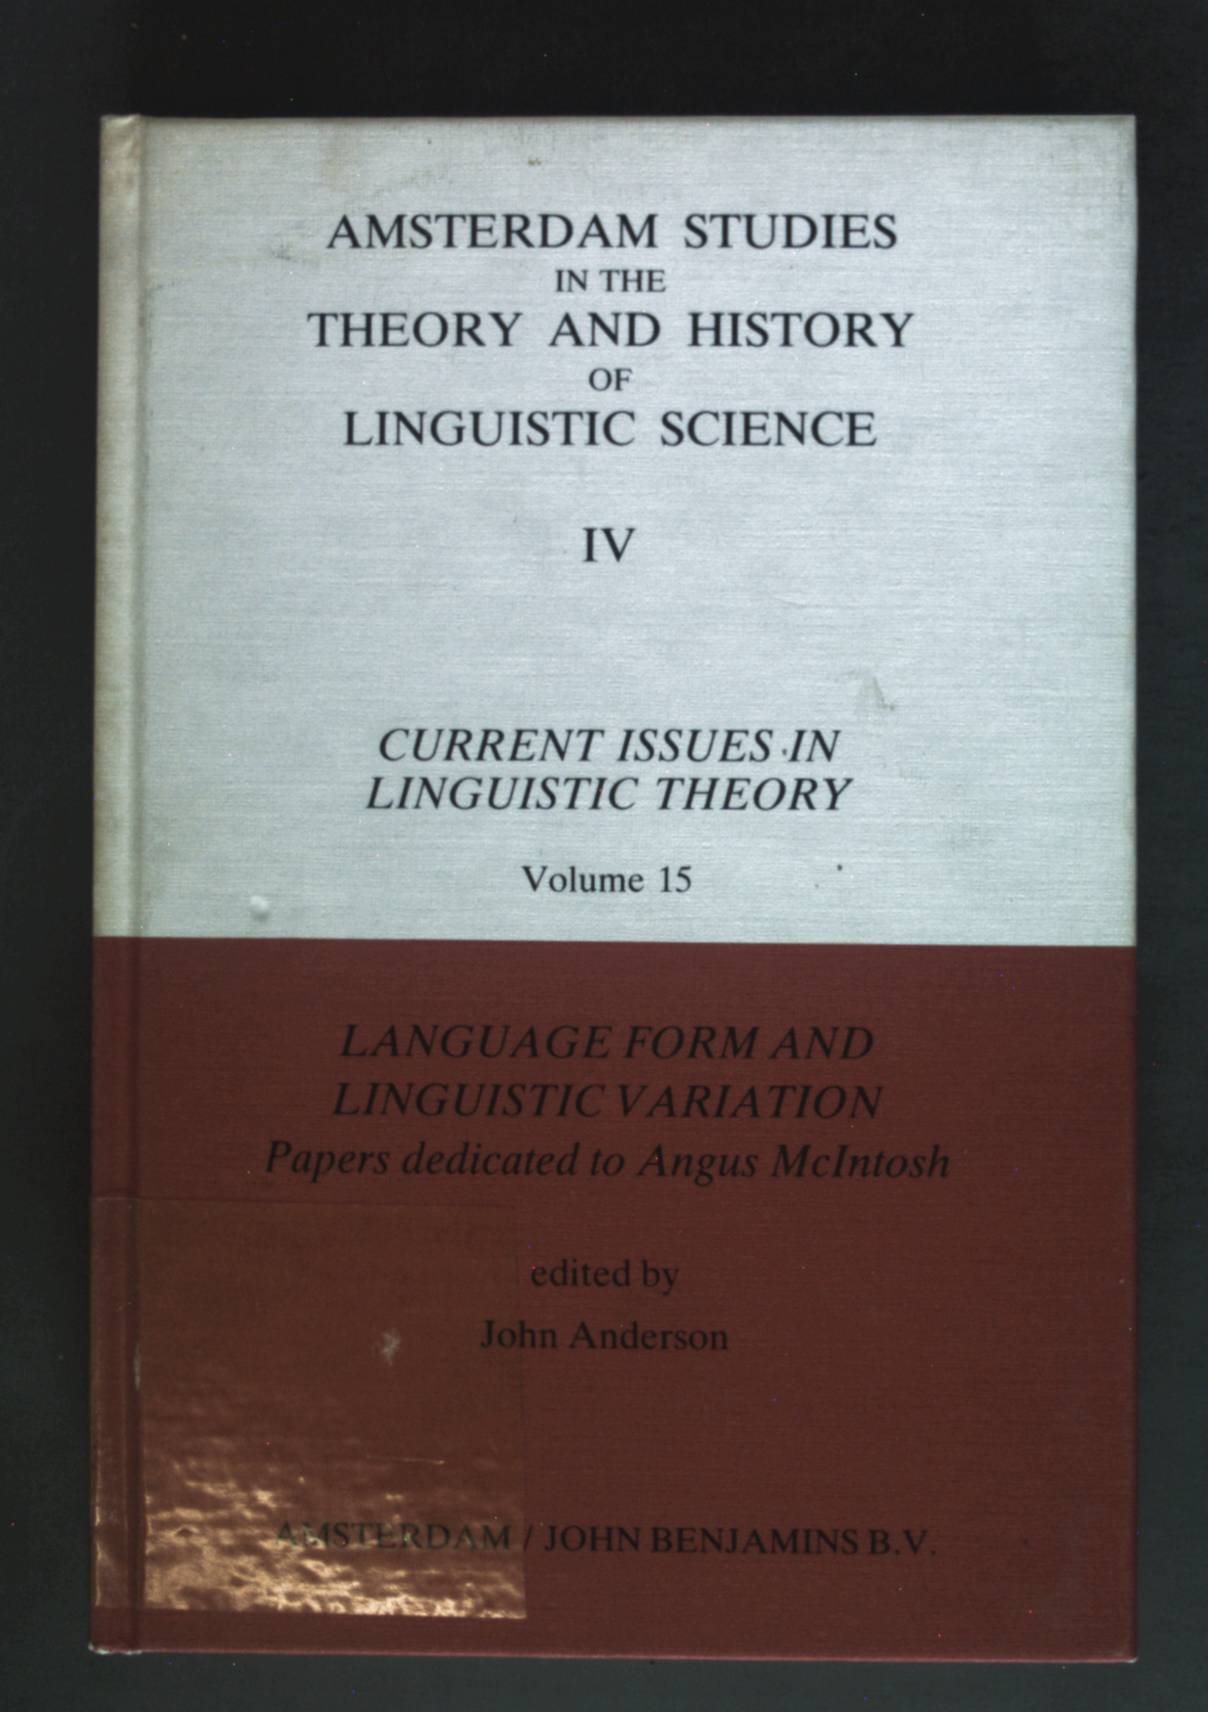 Language Form and Linguistic Variation - Papers dedicated to Angus McIntosh. Amsterdam Studies in the Theory and History of Linguistic Sciense IV: Current Issus in Linguistic theory: Volume 15 - Anderson, John